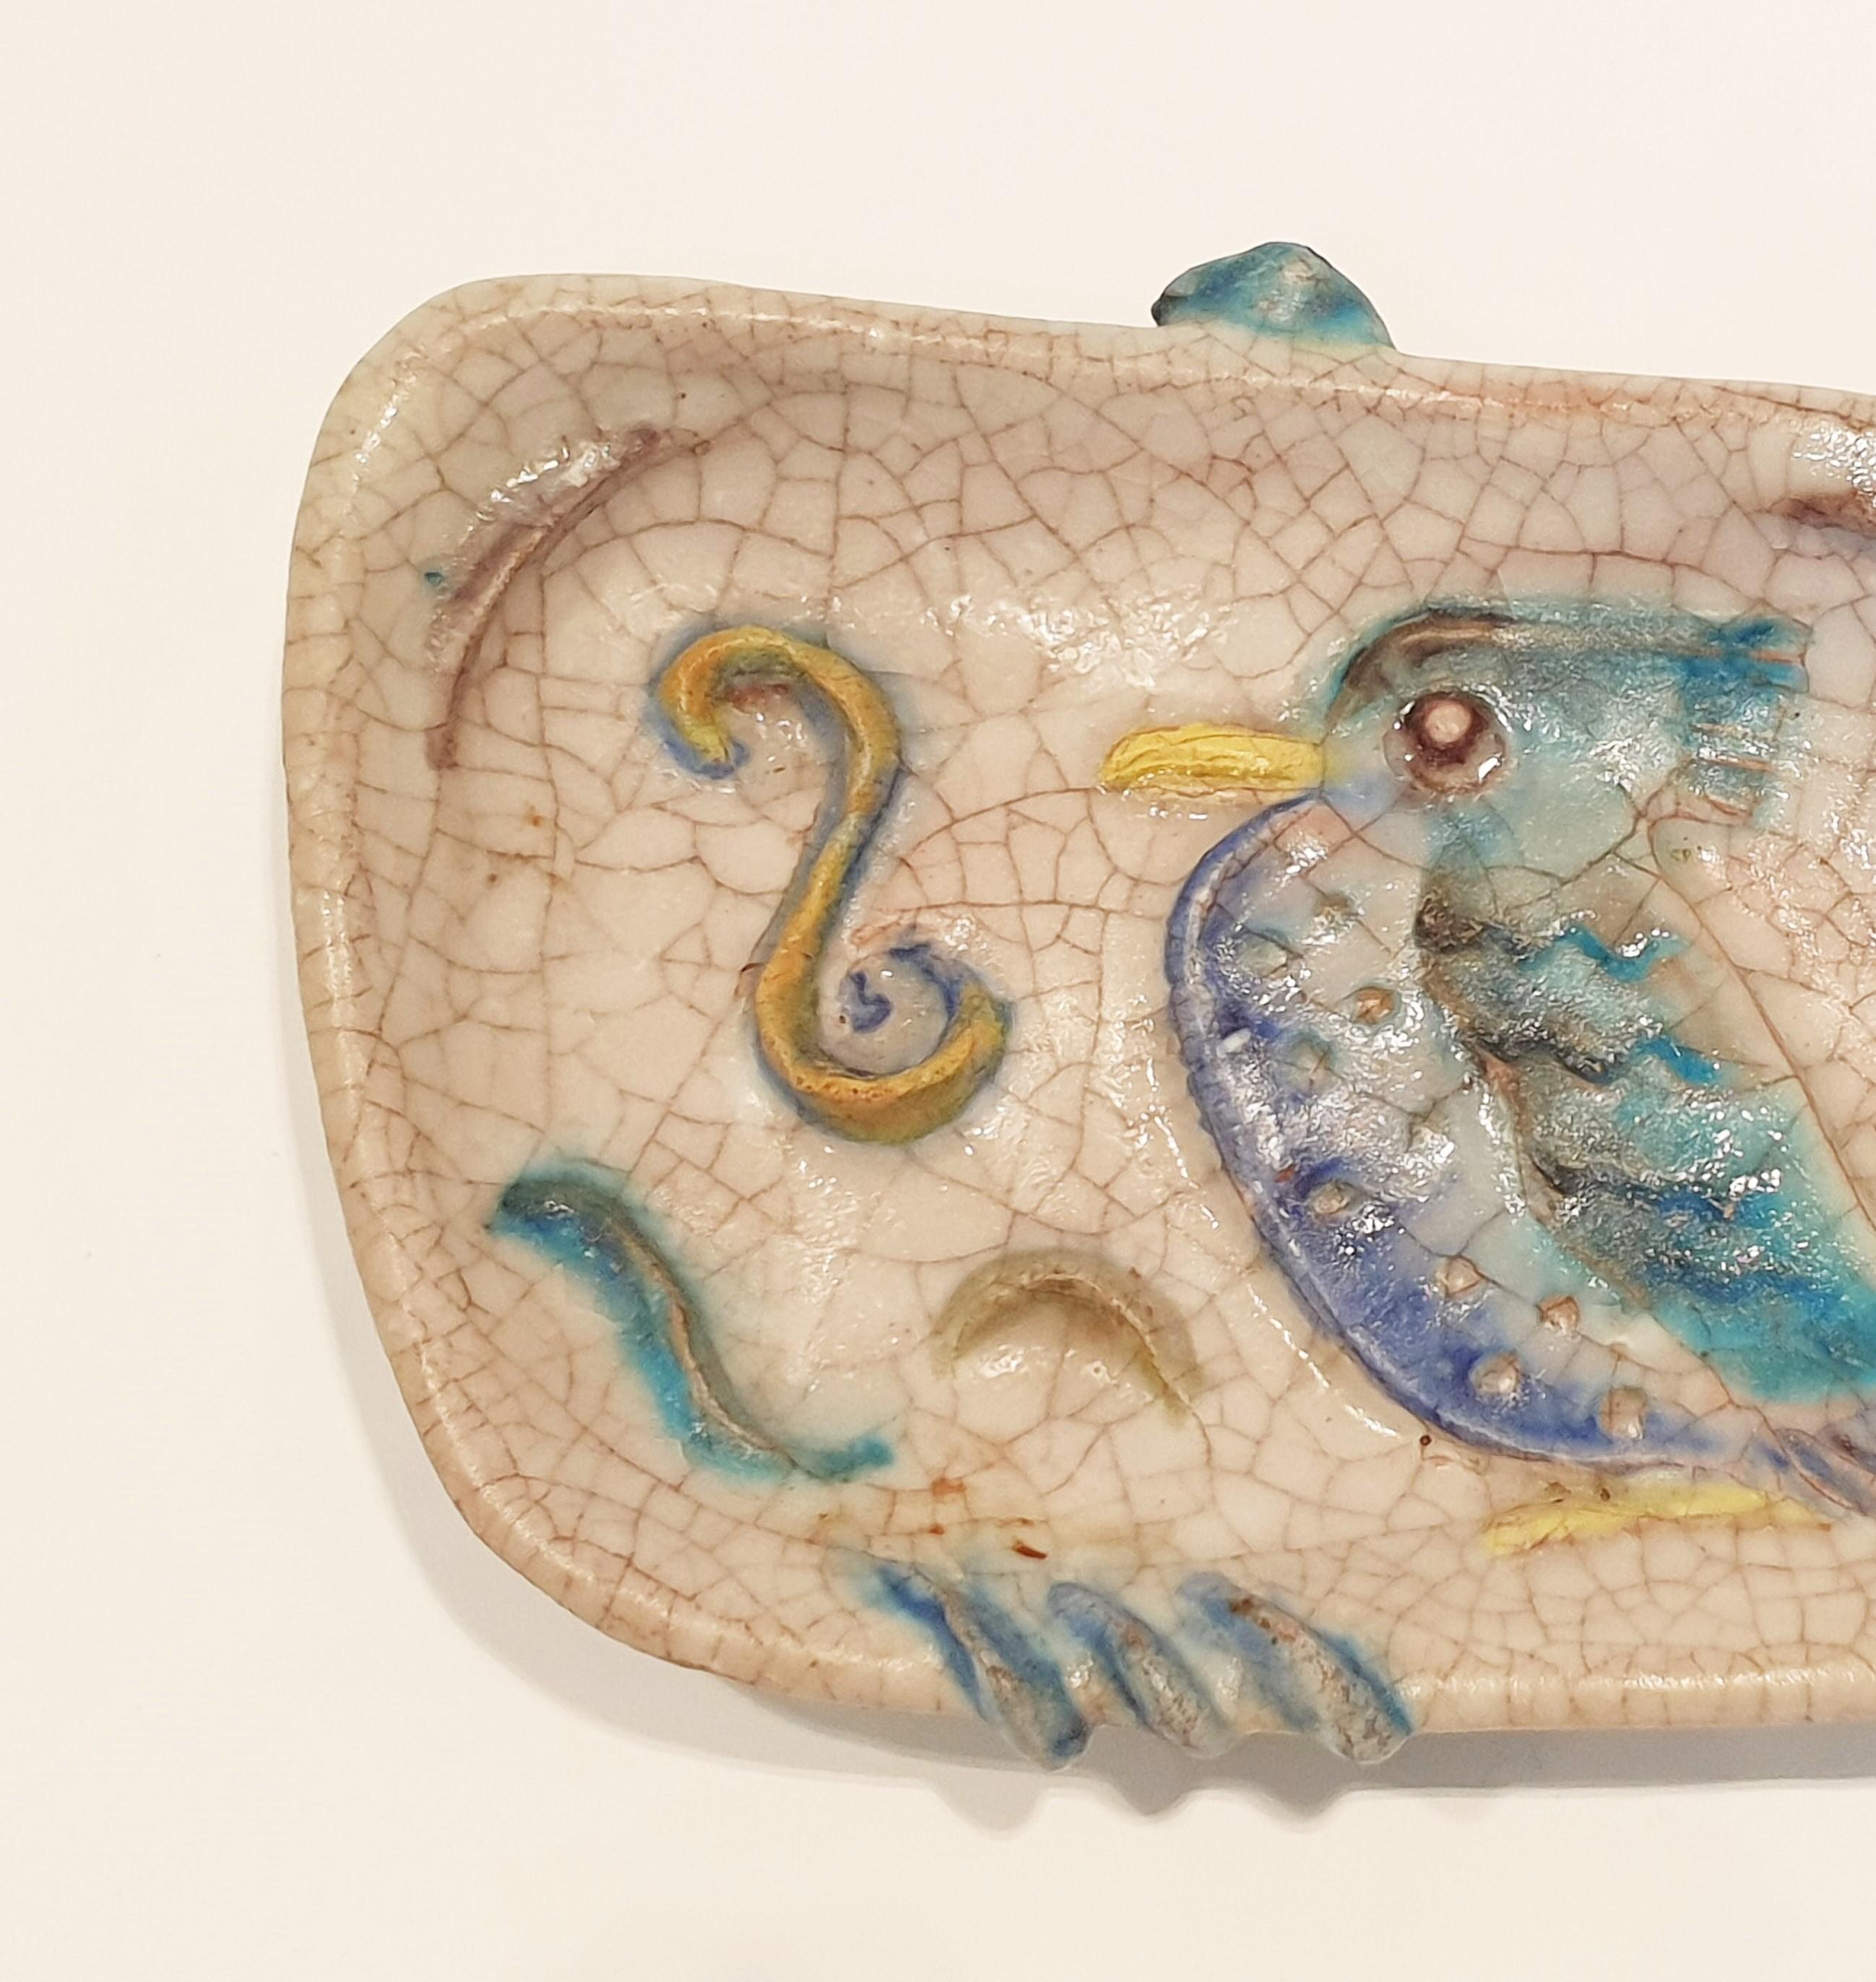 Colourful Md Century, Italian ceramic dish with raised decoration of a bird in crackle glaze. Signed to the base Fantoni.
We have three dishes available.